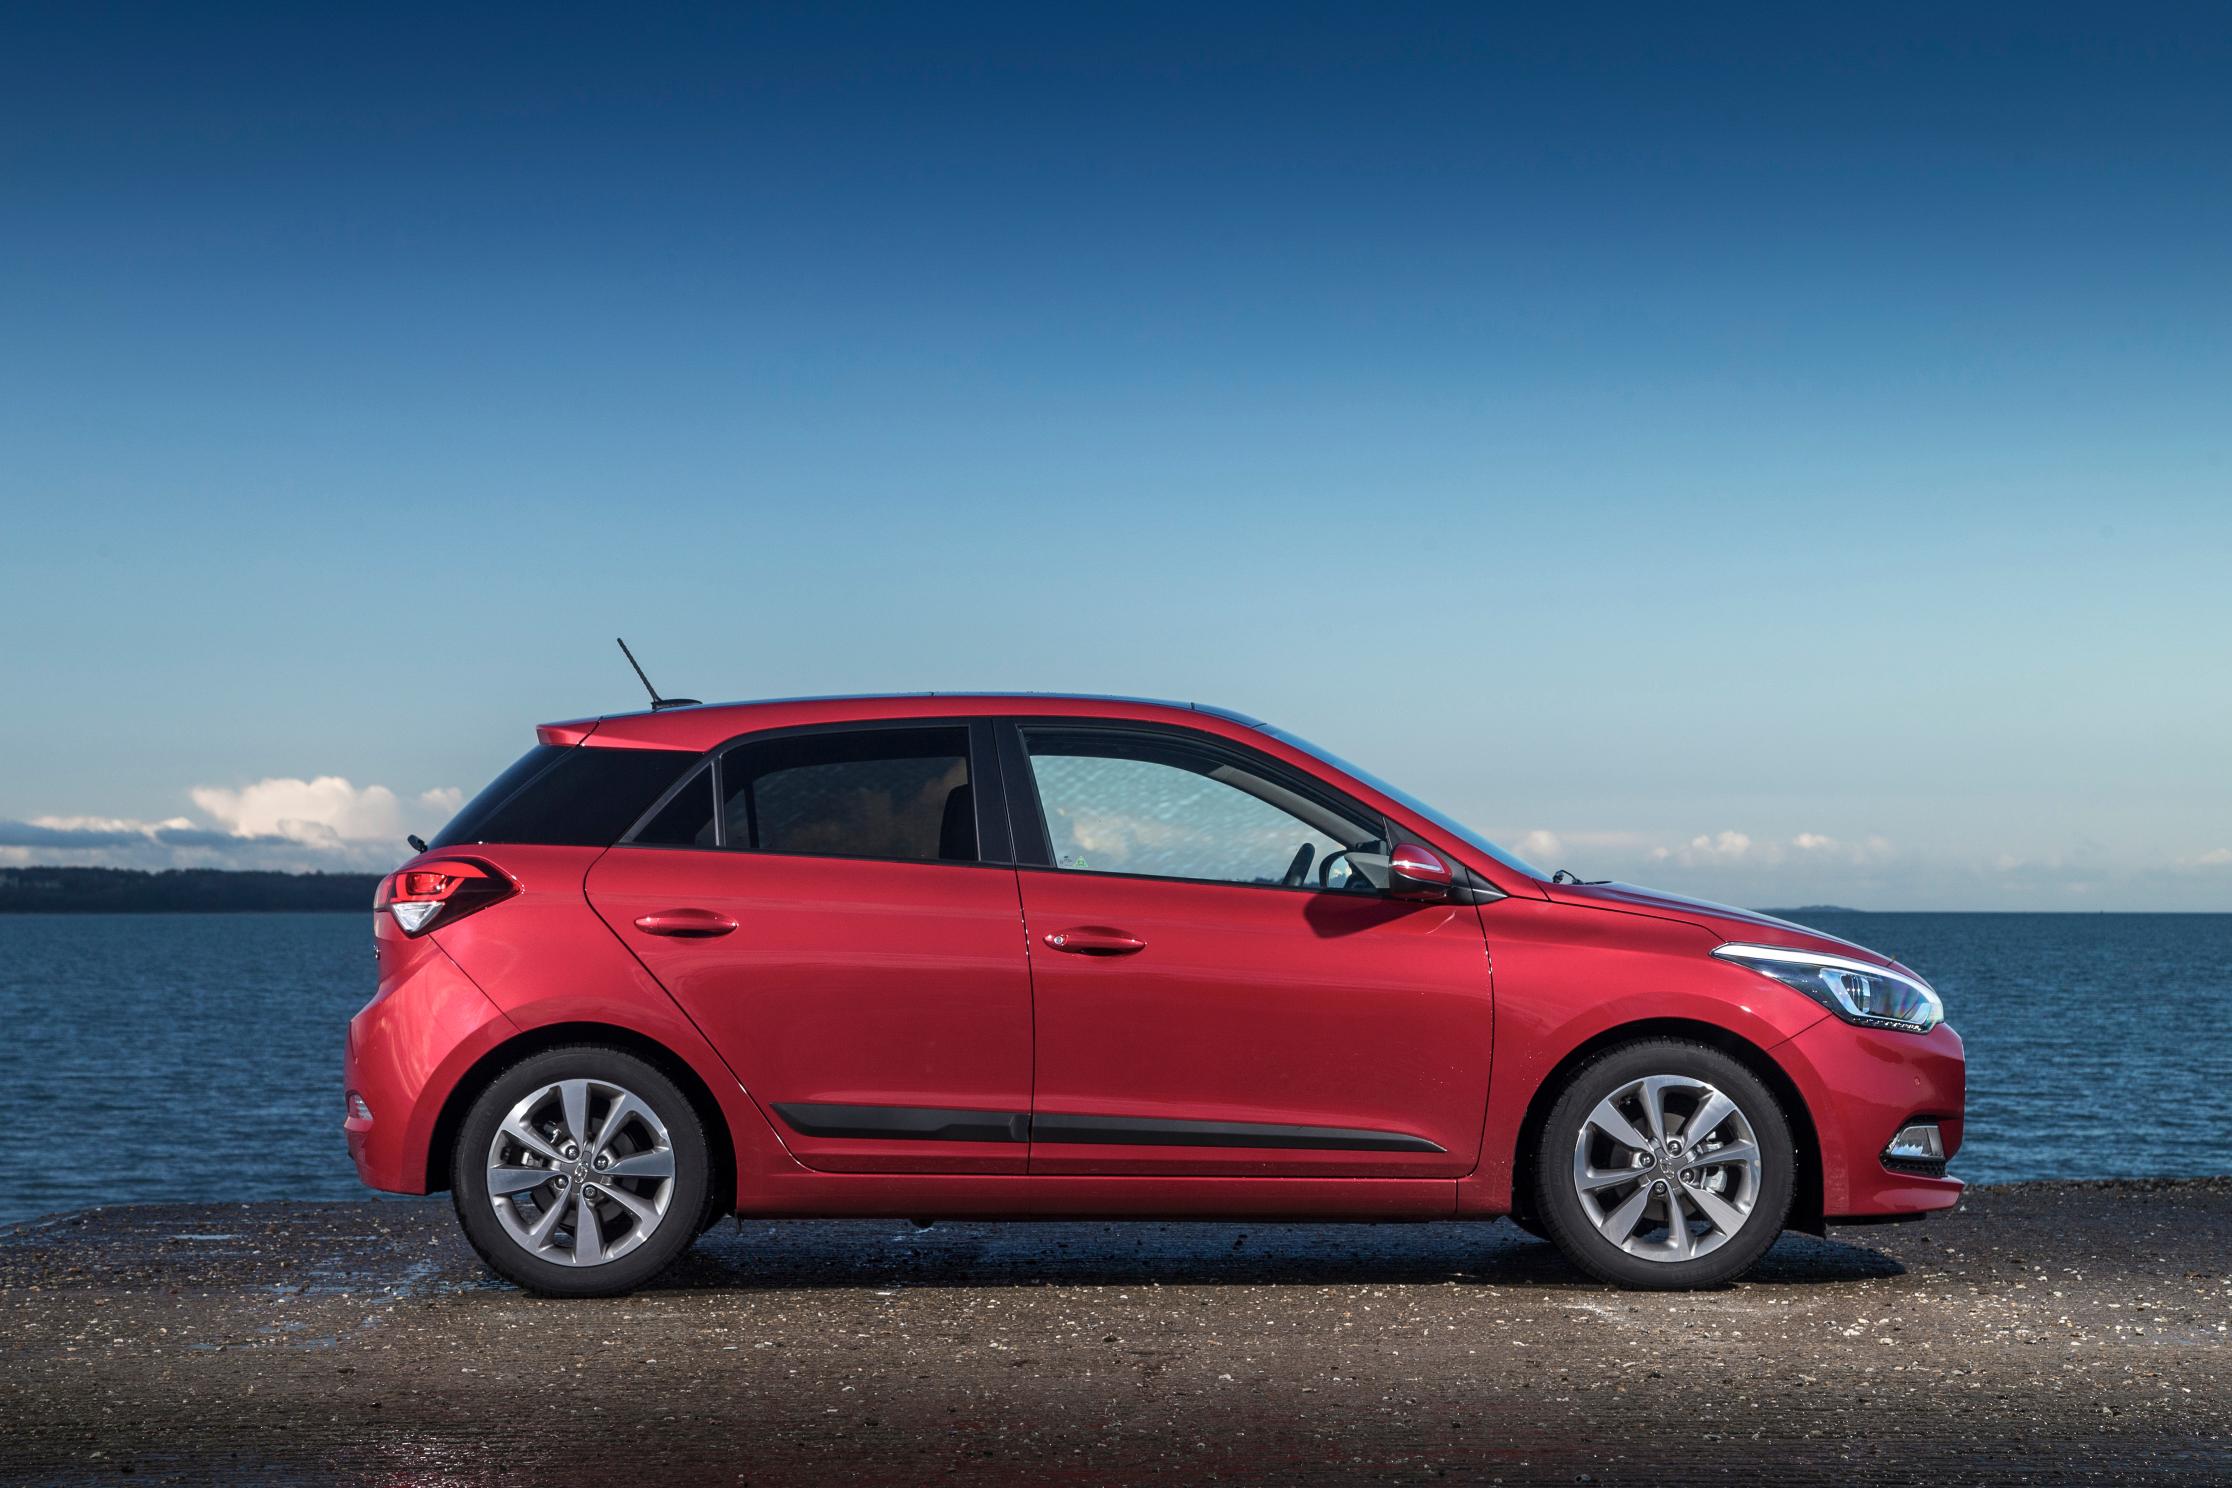 2015 Hyundai i20 Goes on Sale in Britain for Slightly Less than a VW ...